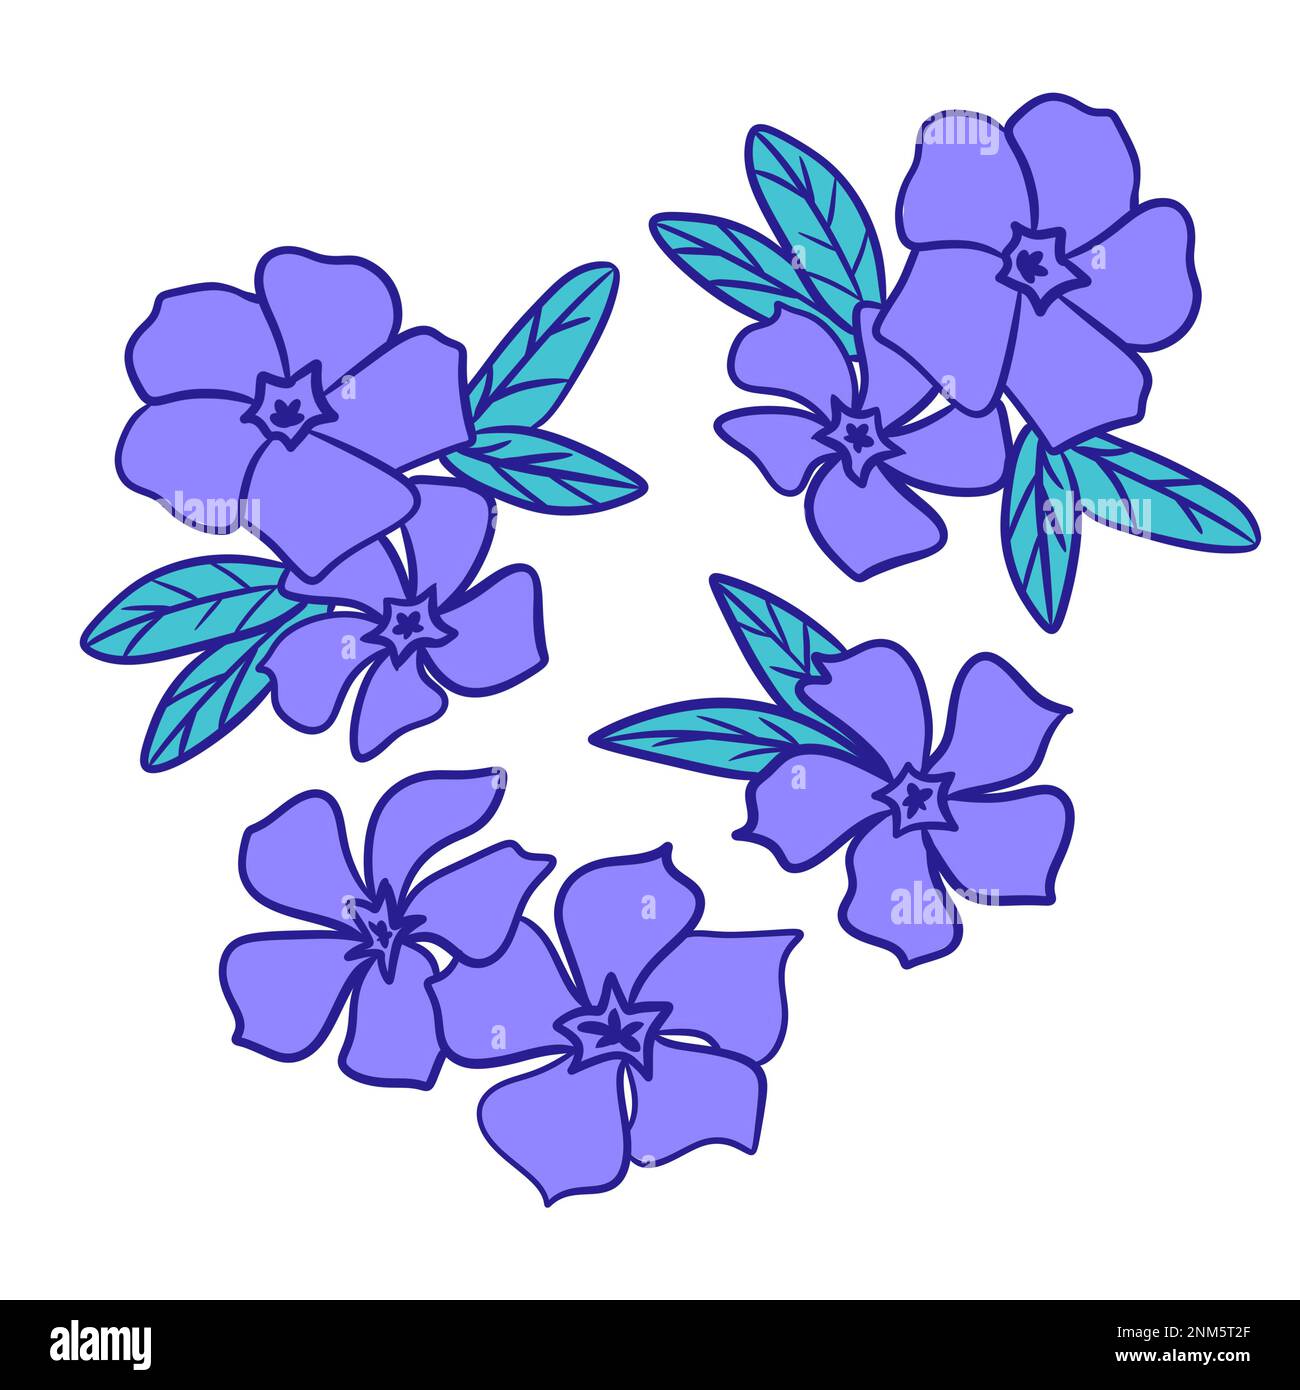 Download Japanese Flower Drawing Clipart Japan Cherry Blossom  Vector  Purple Floral Png PNG Image with No Background  PNGkeycom